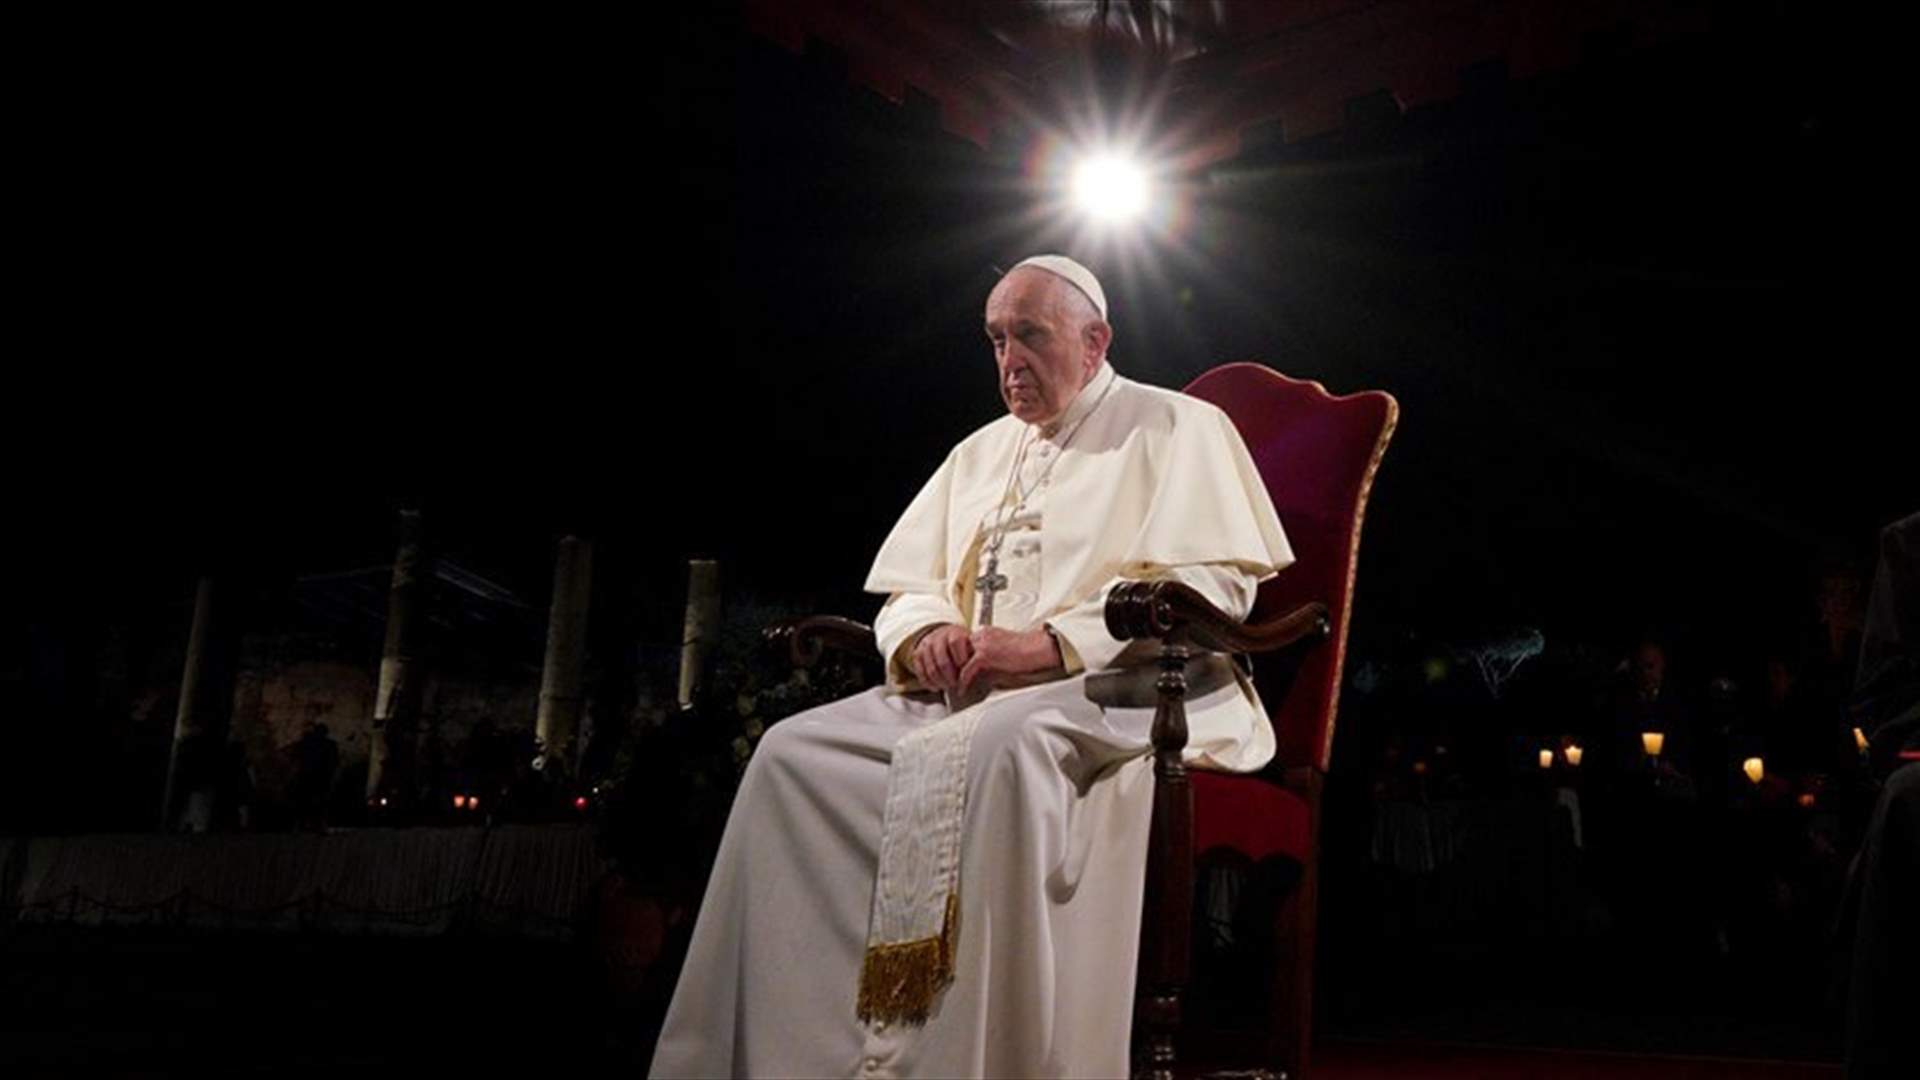 On Good Friday, pope hears harrowing stories of human trafficking